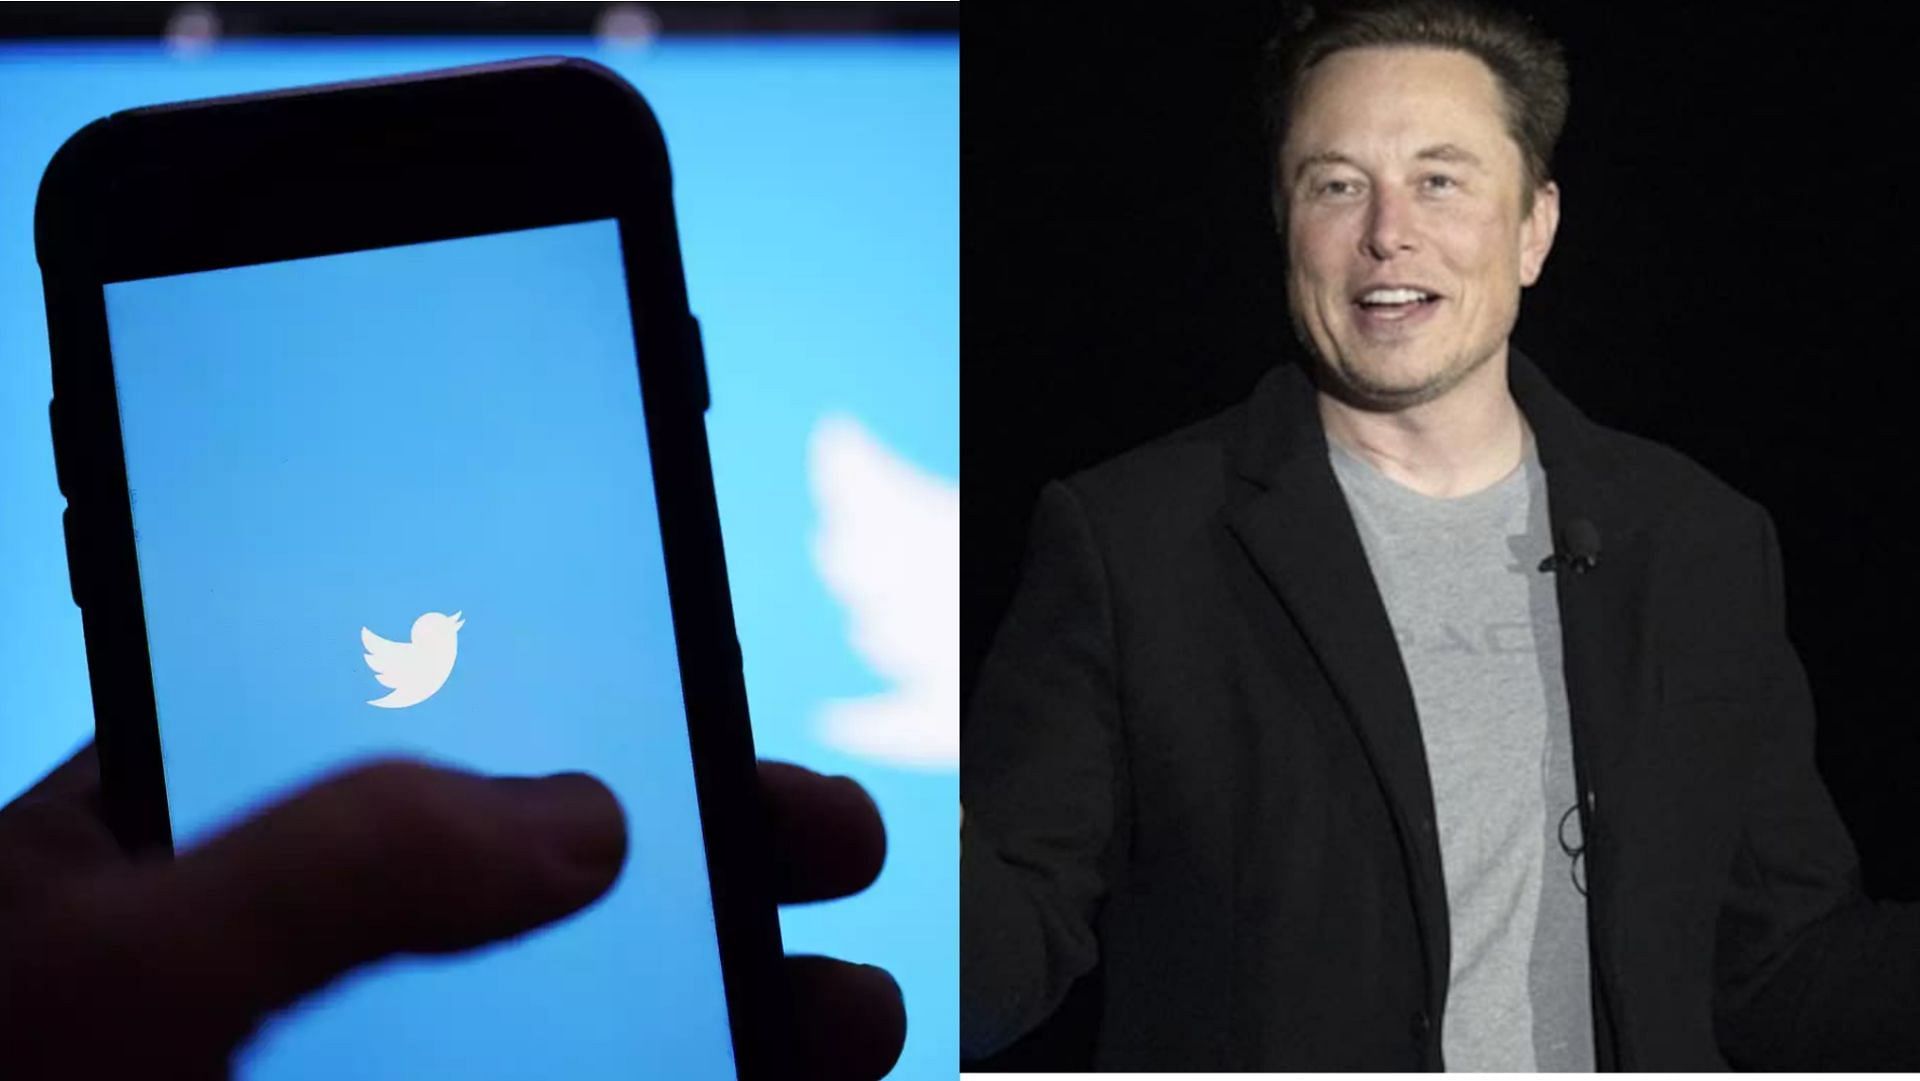 Two important changes have been discussed by Musk (Images via Twitter, NDTV)